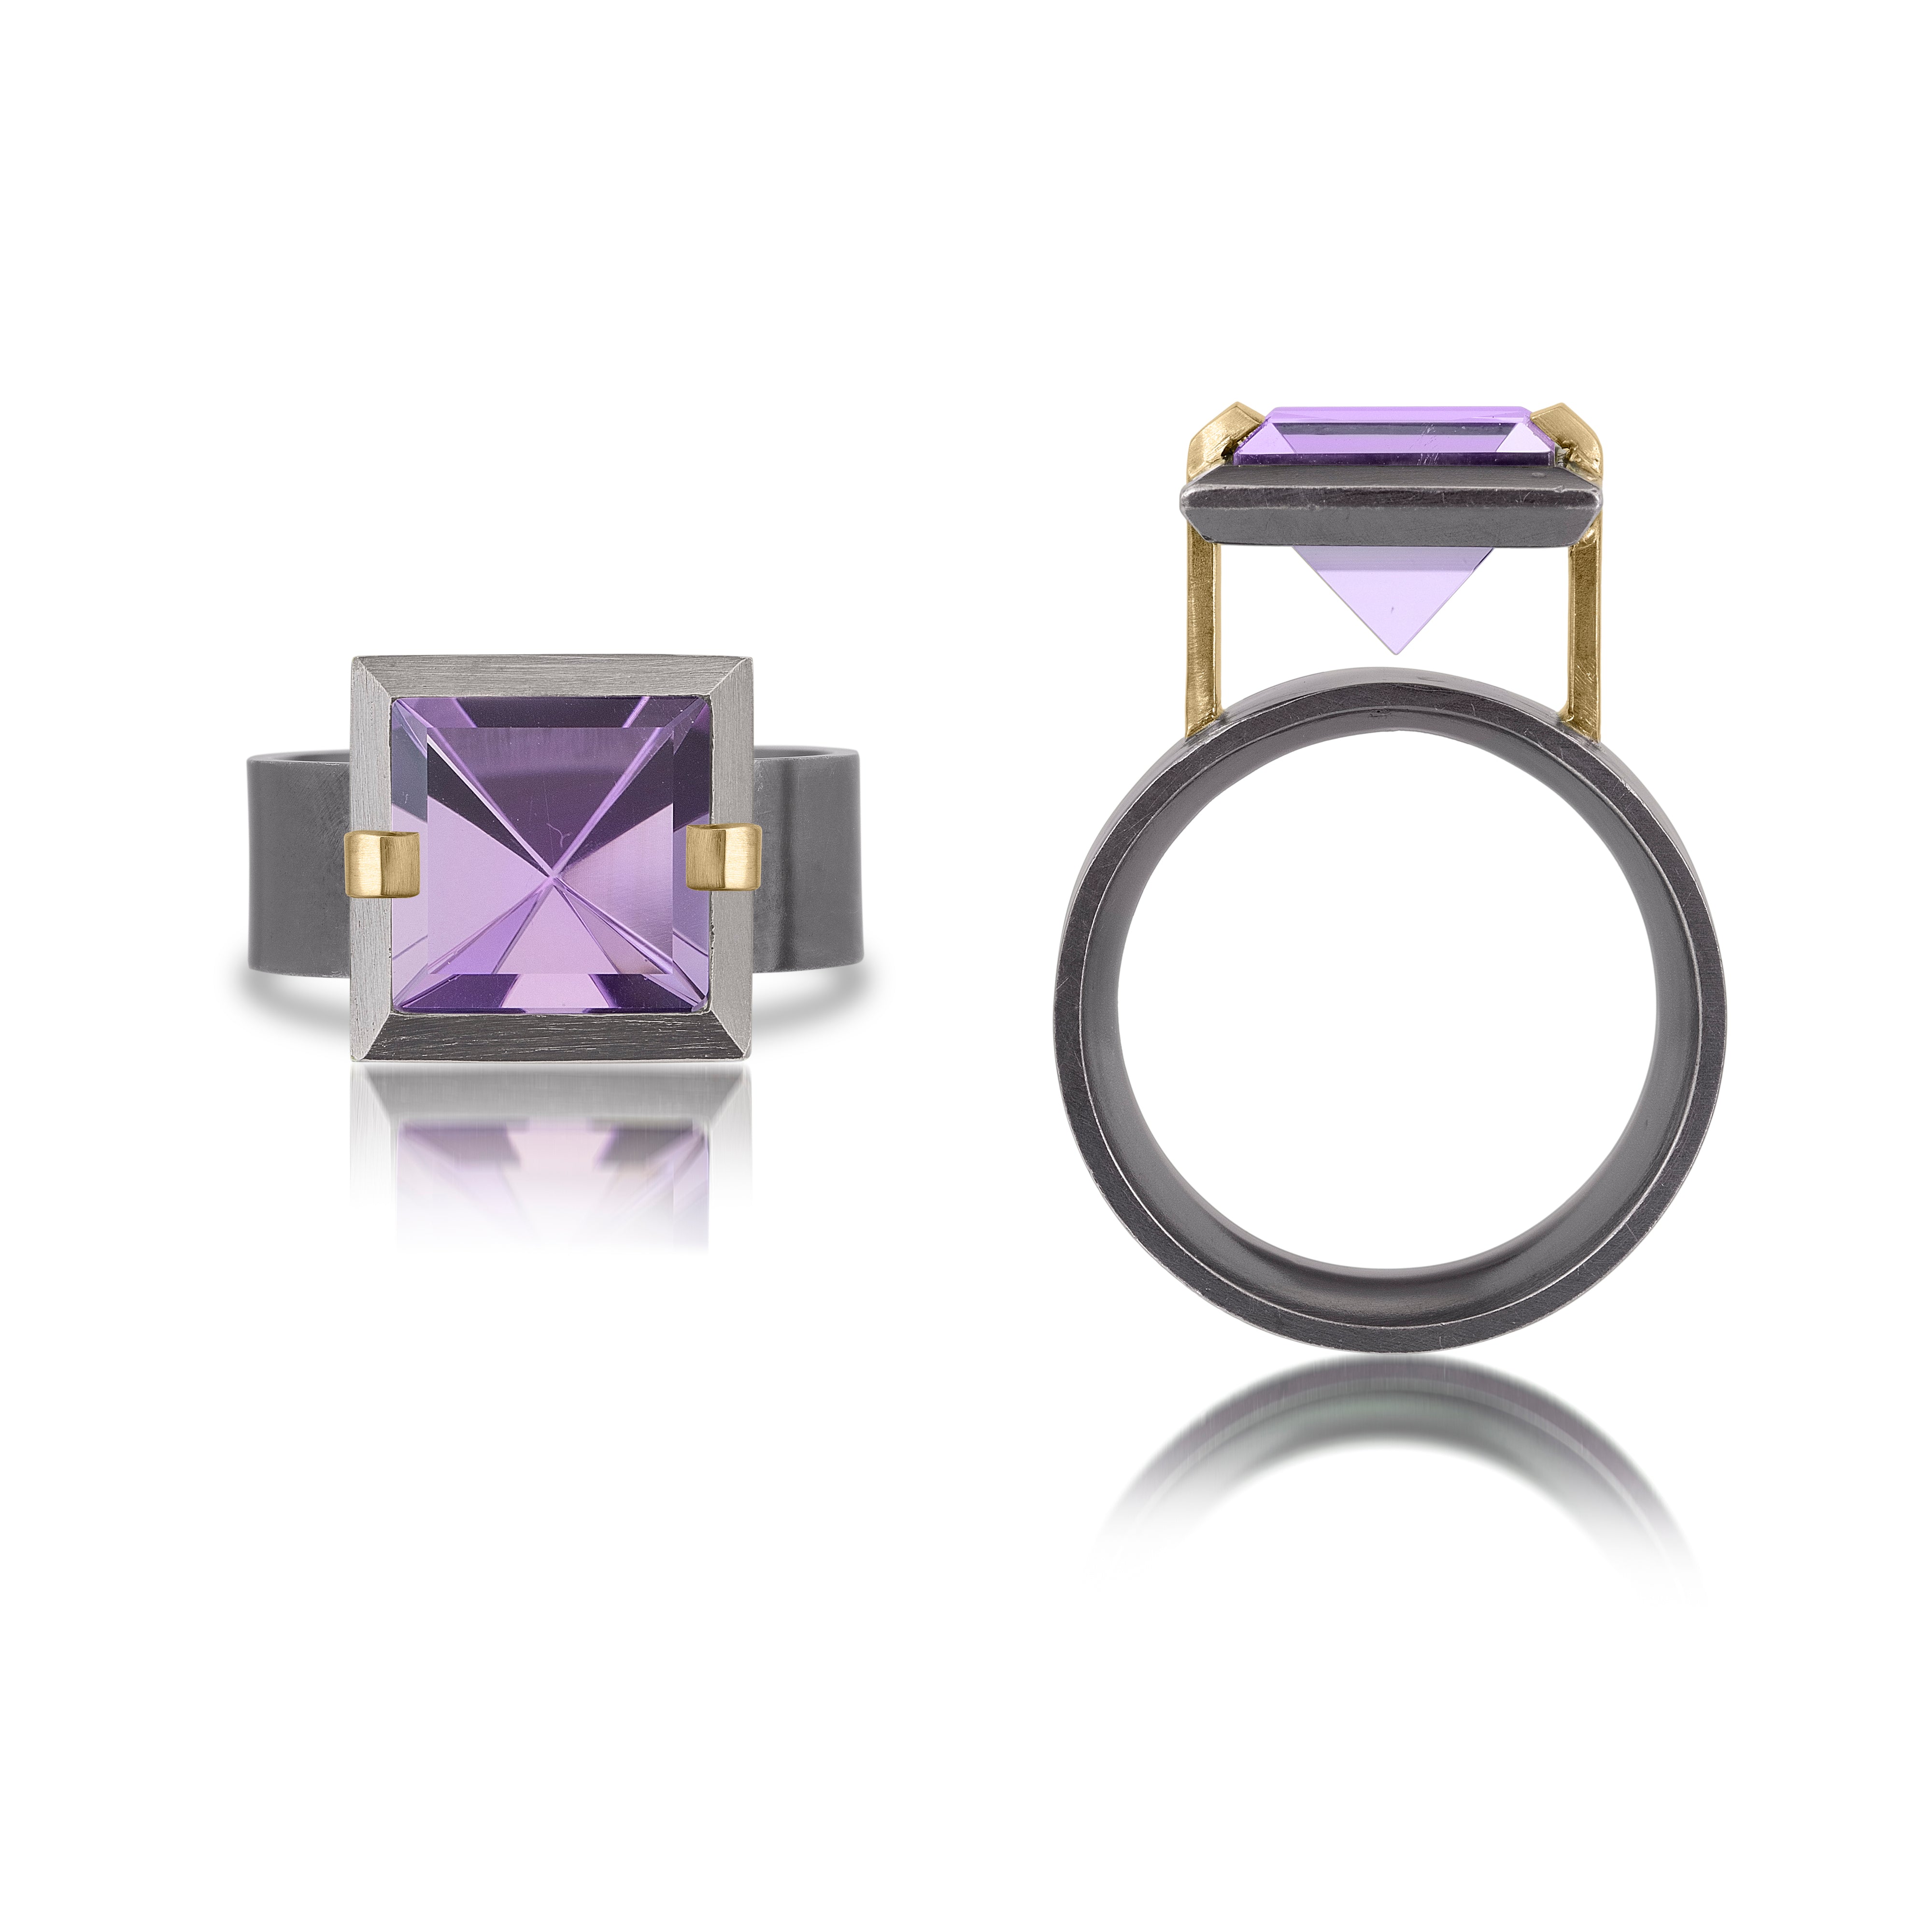 This small style Facets ring is natural gemstone set in oxidized sterling and 18k gold. Crisp and sparkling faceted squares of gemstone are elevated and framed in oxidized silver accented with 18k gold prongs.  The ring features an oxidized sterling comfort band.  Gemstone 3.26- 3.76 tcw.